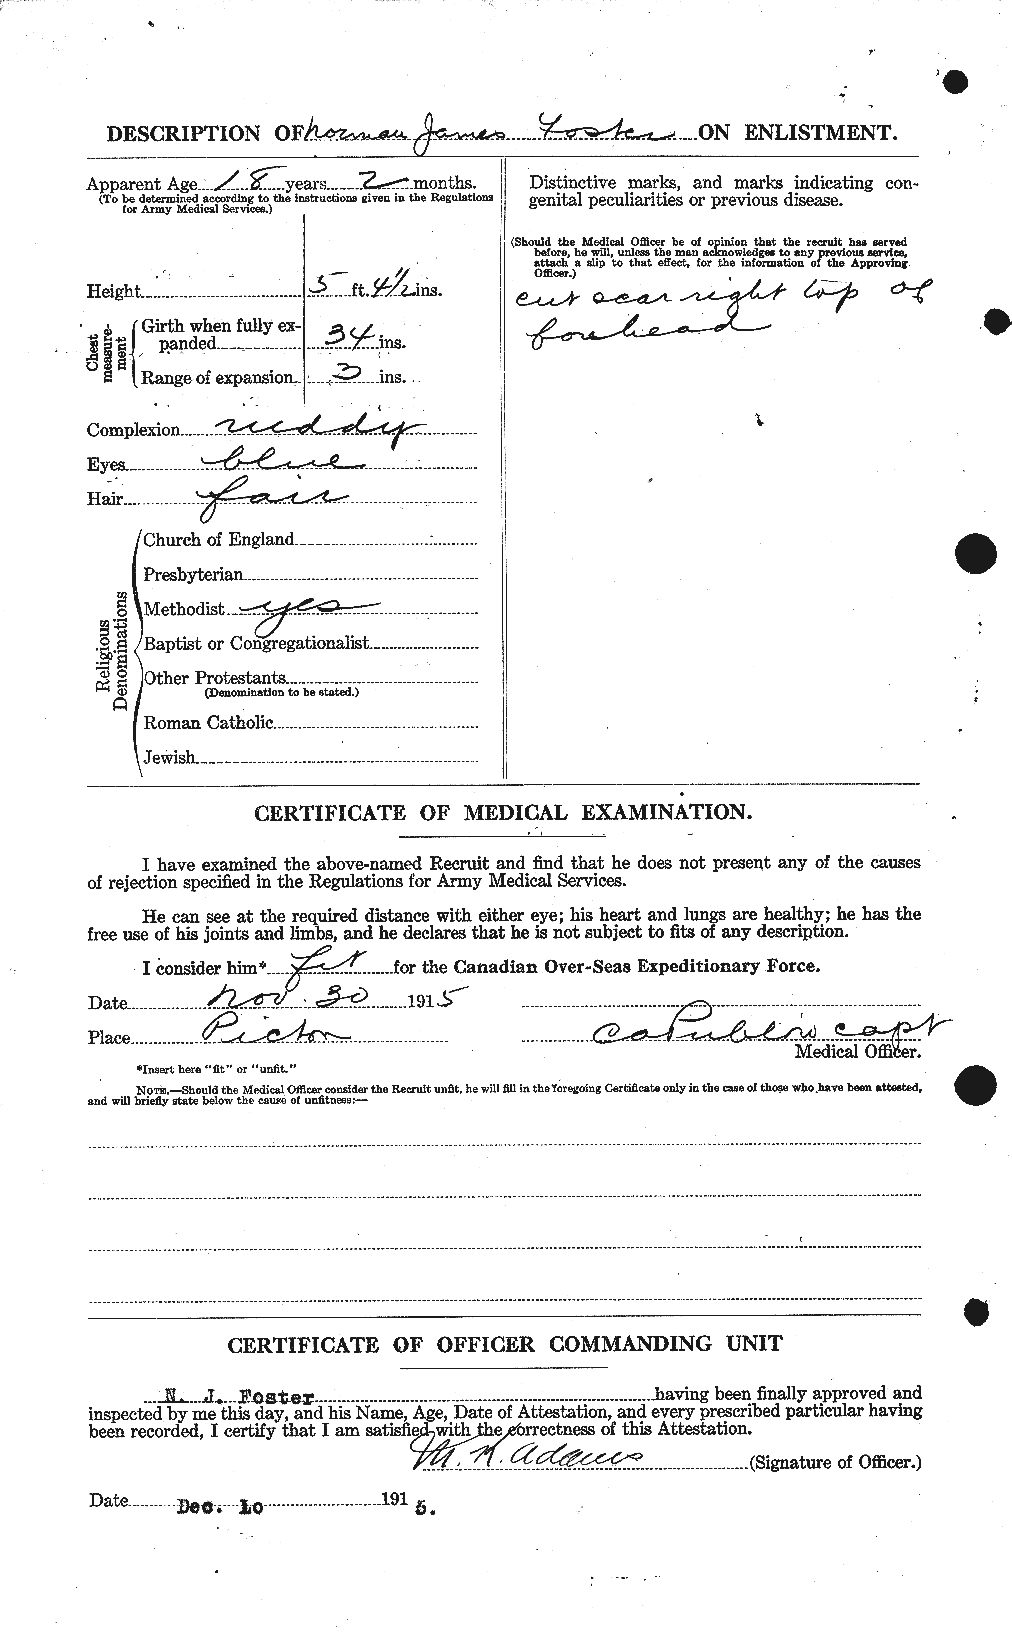 Personnel Records of the First World War - CEF 333435b